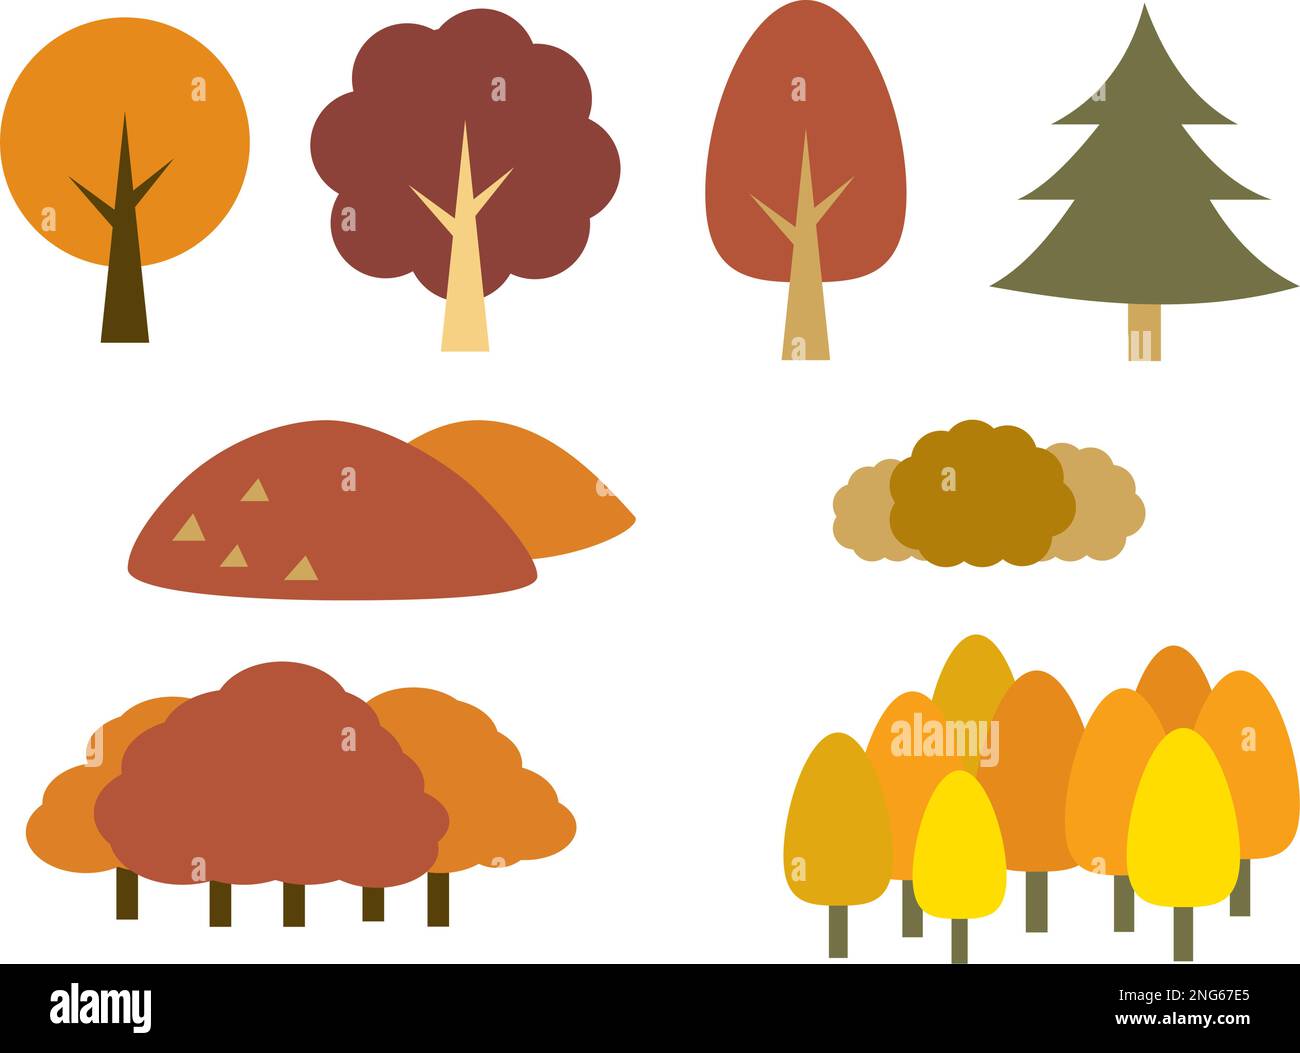 Illustration material set of autumn leaves trees and mountains. Simple illustrations of isolated four types of trees, mountains and forests. Stock Vector